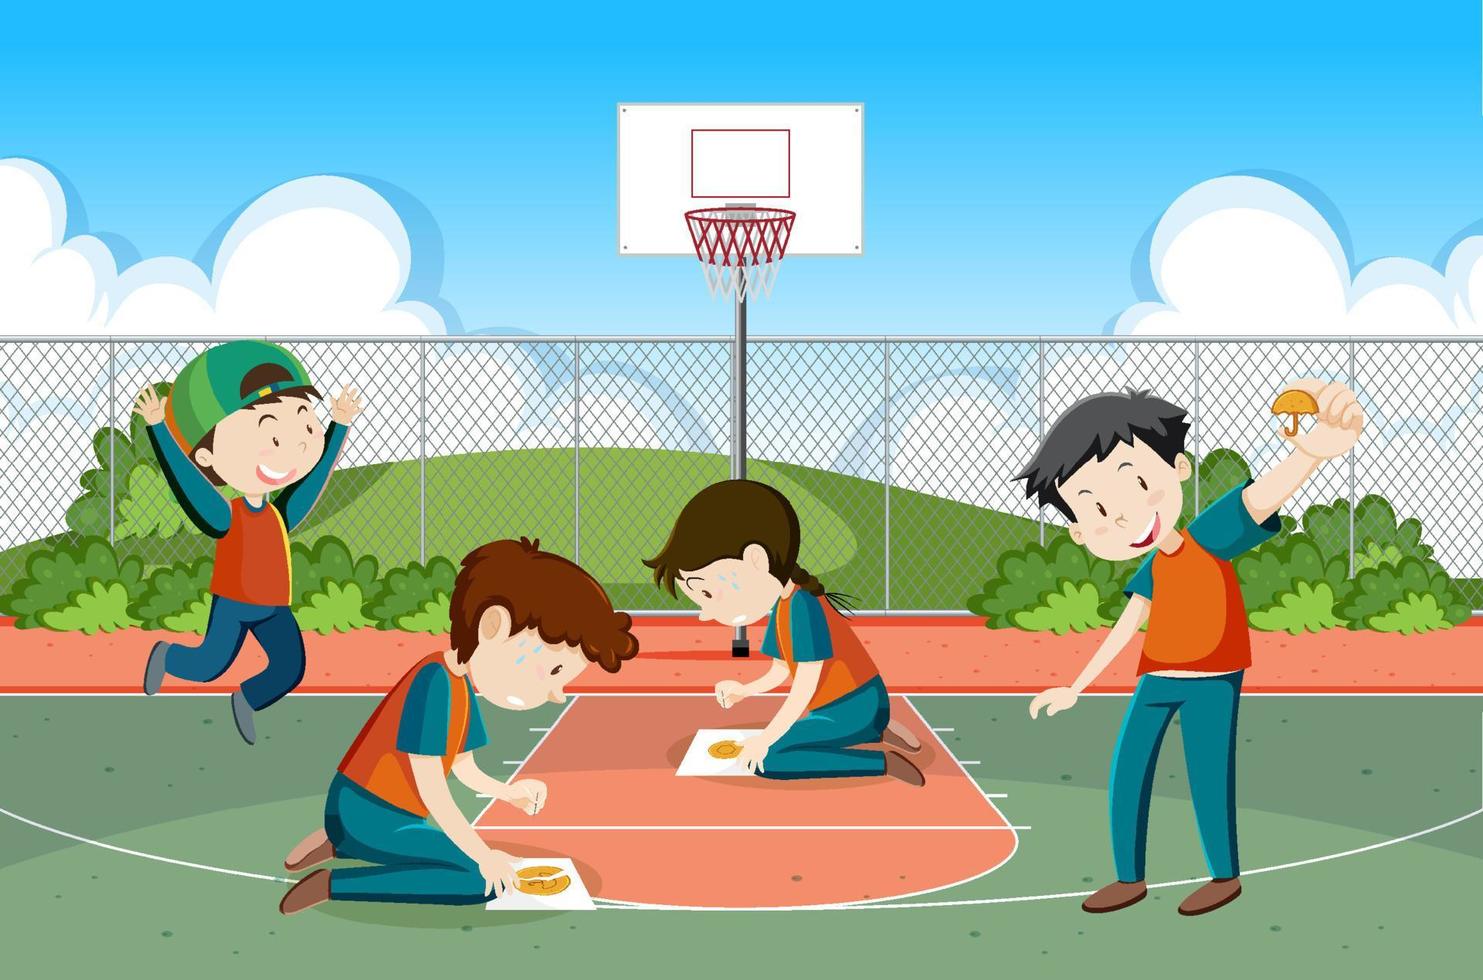 Children playing scratch dalgona cookie at the park vector